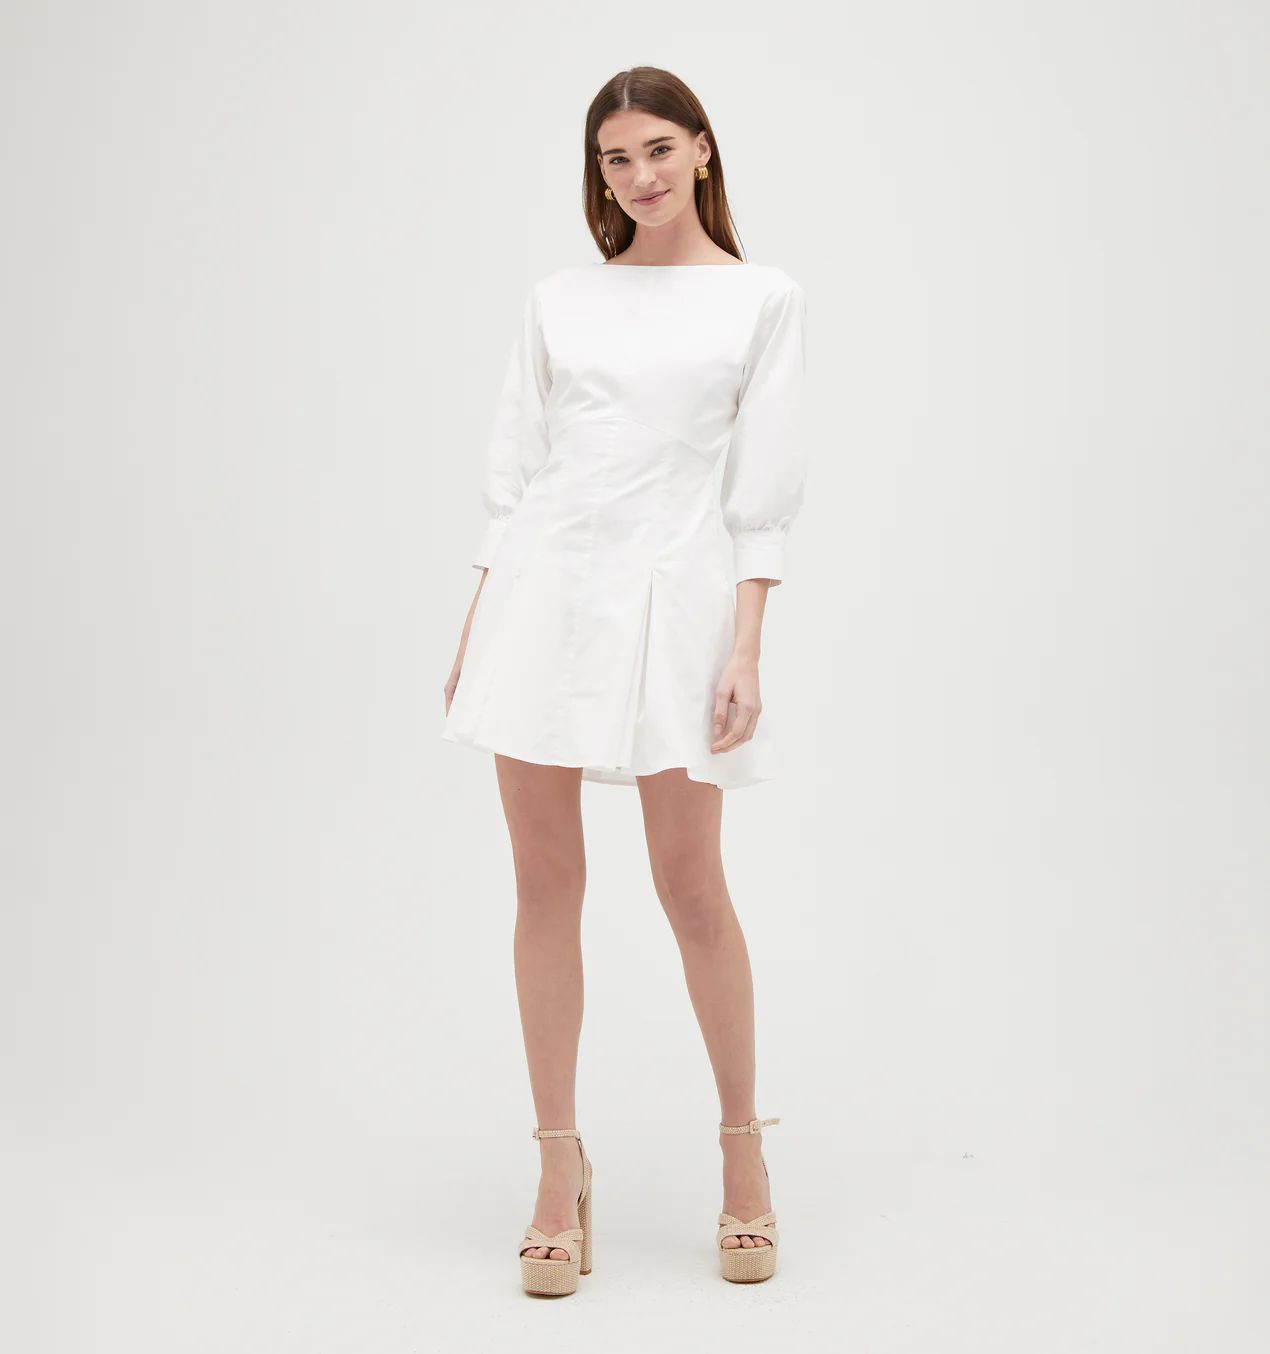 The Aveline Dress - White Cotton Sateen | Hill House Home